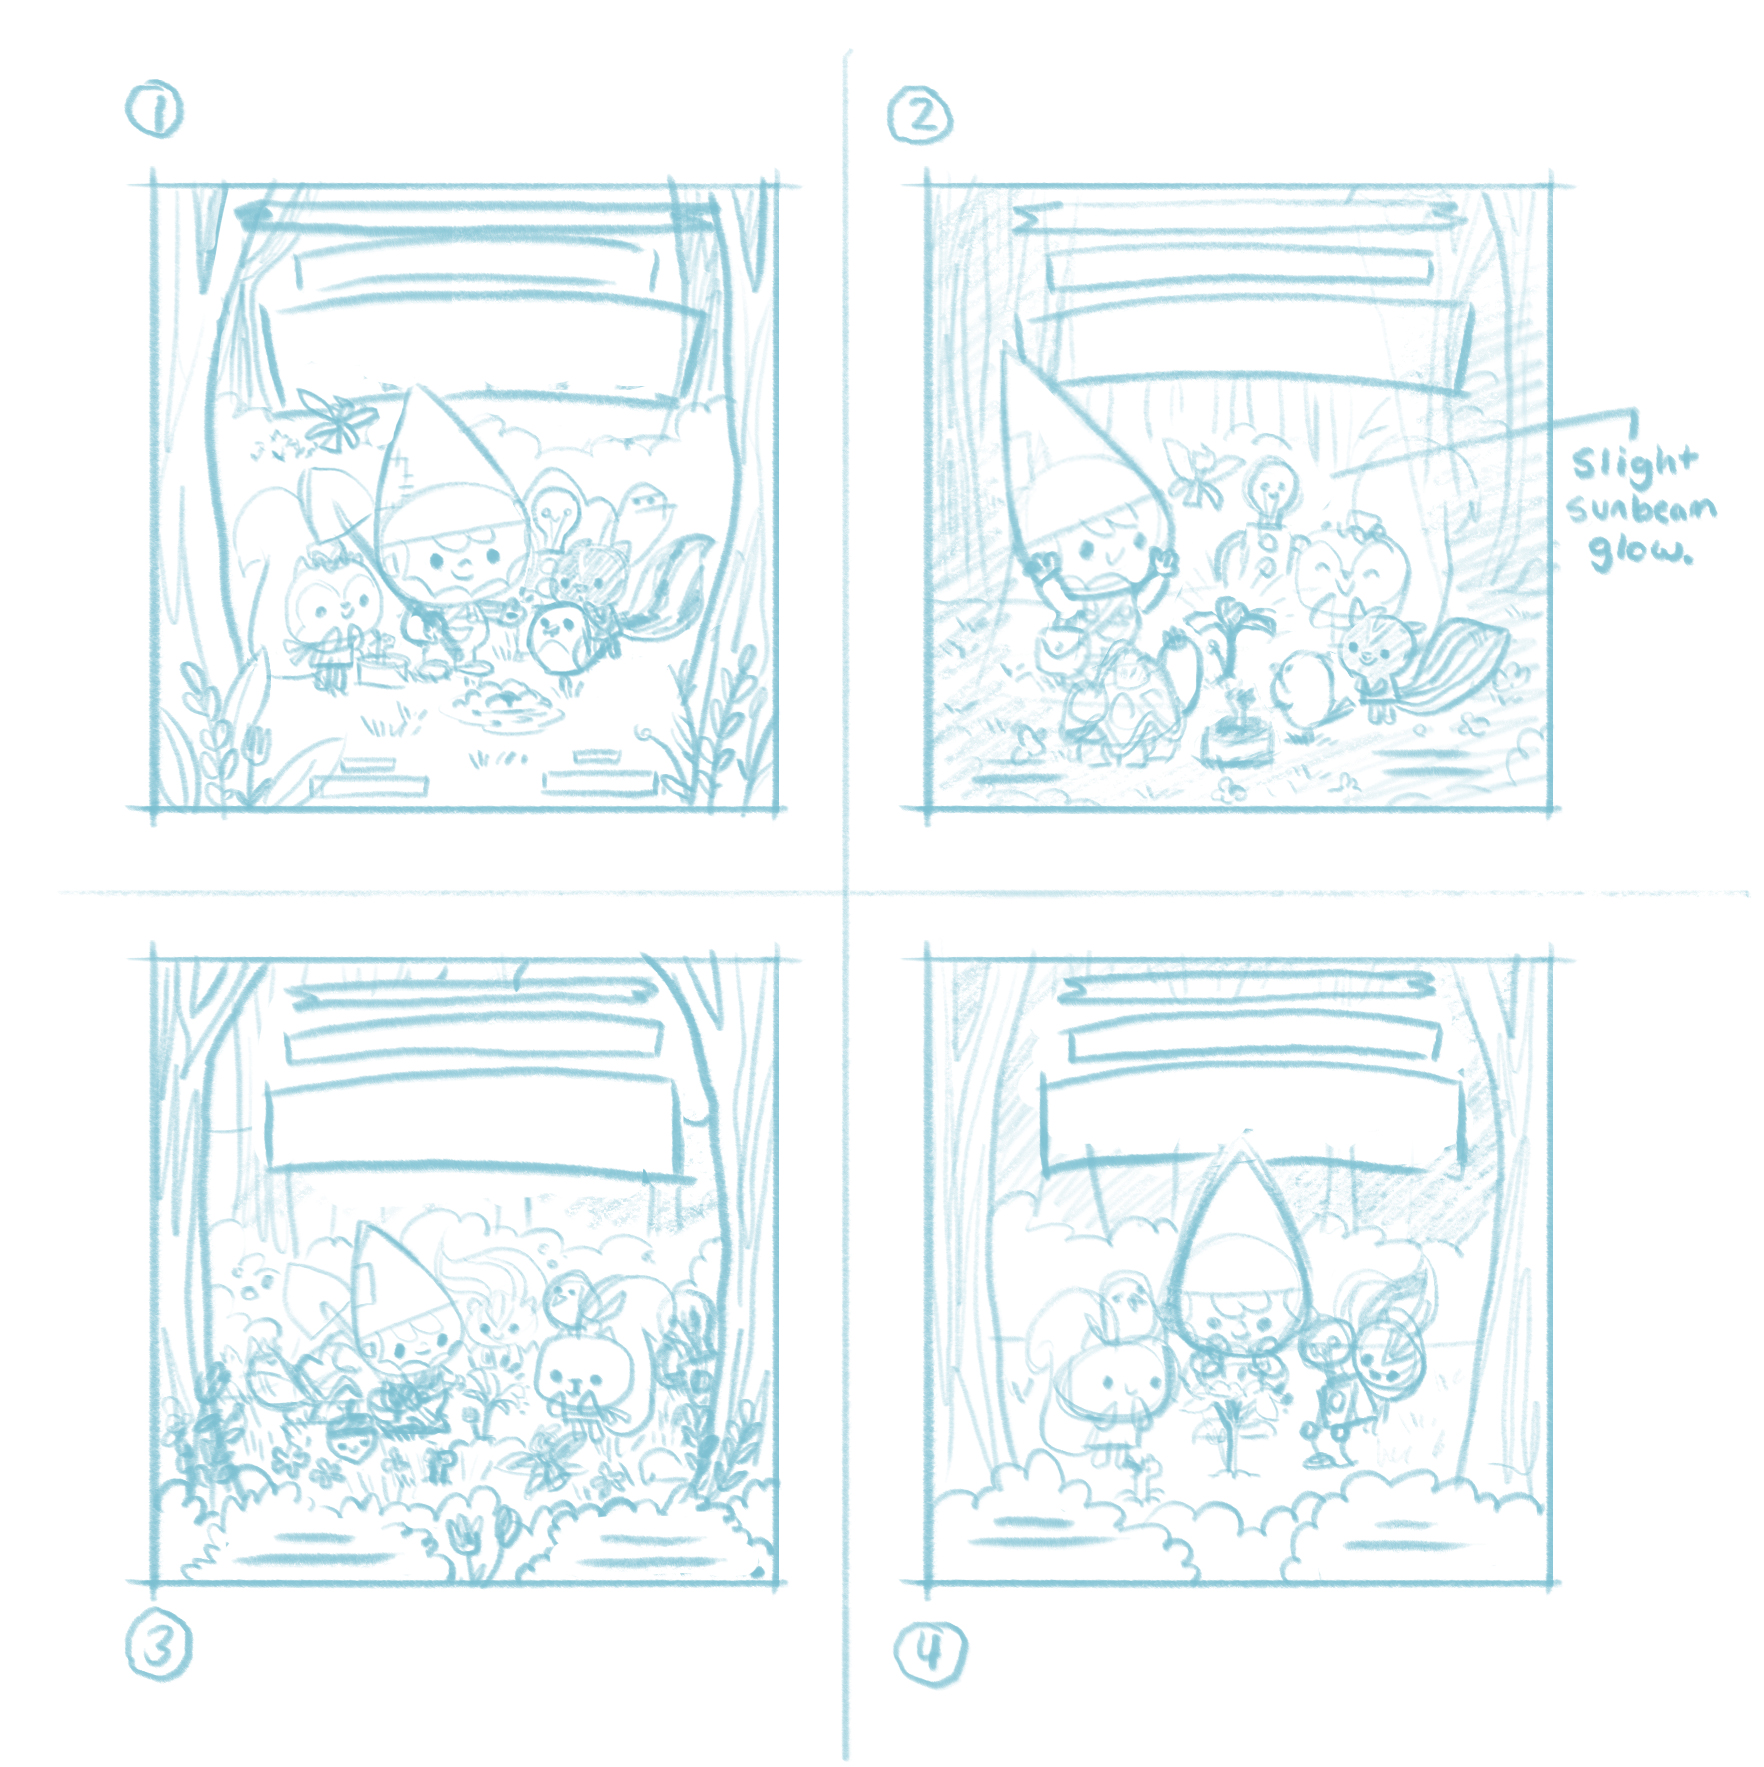 Rough-Cover-Sketches.jpg